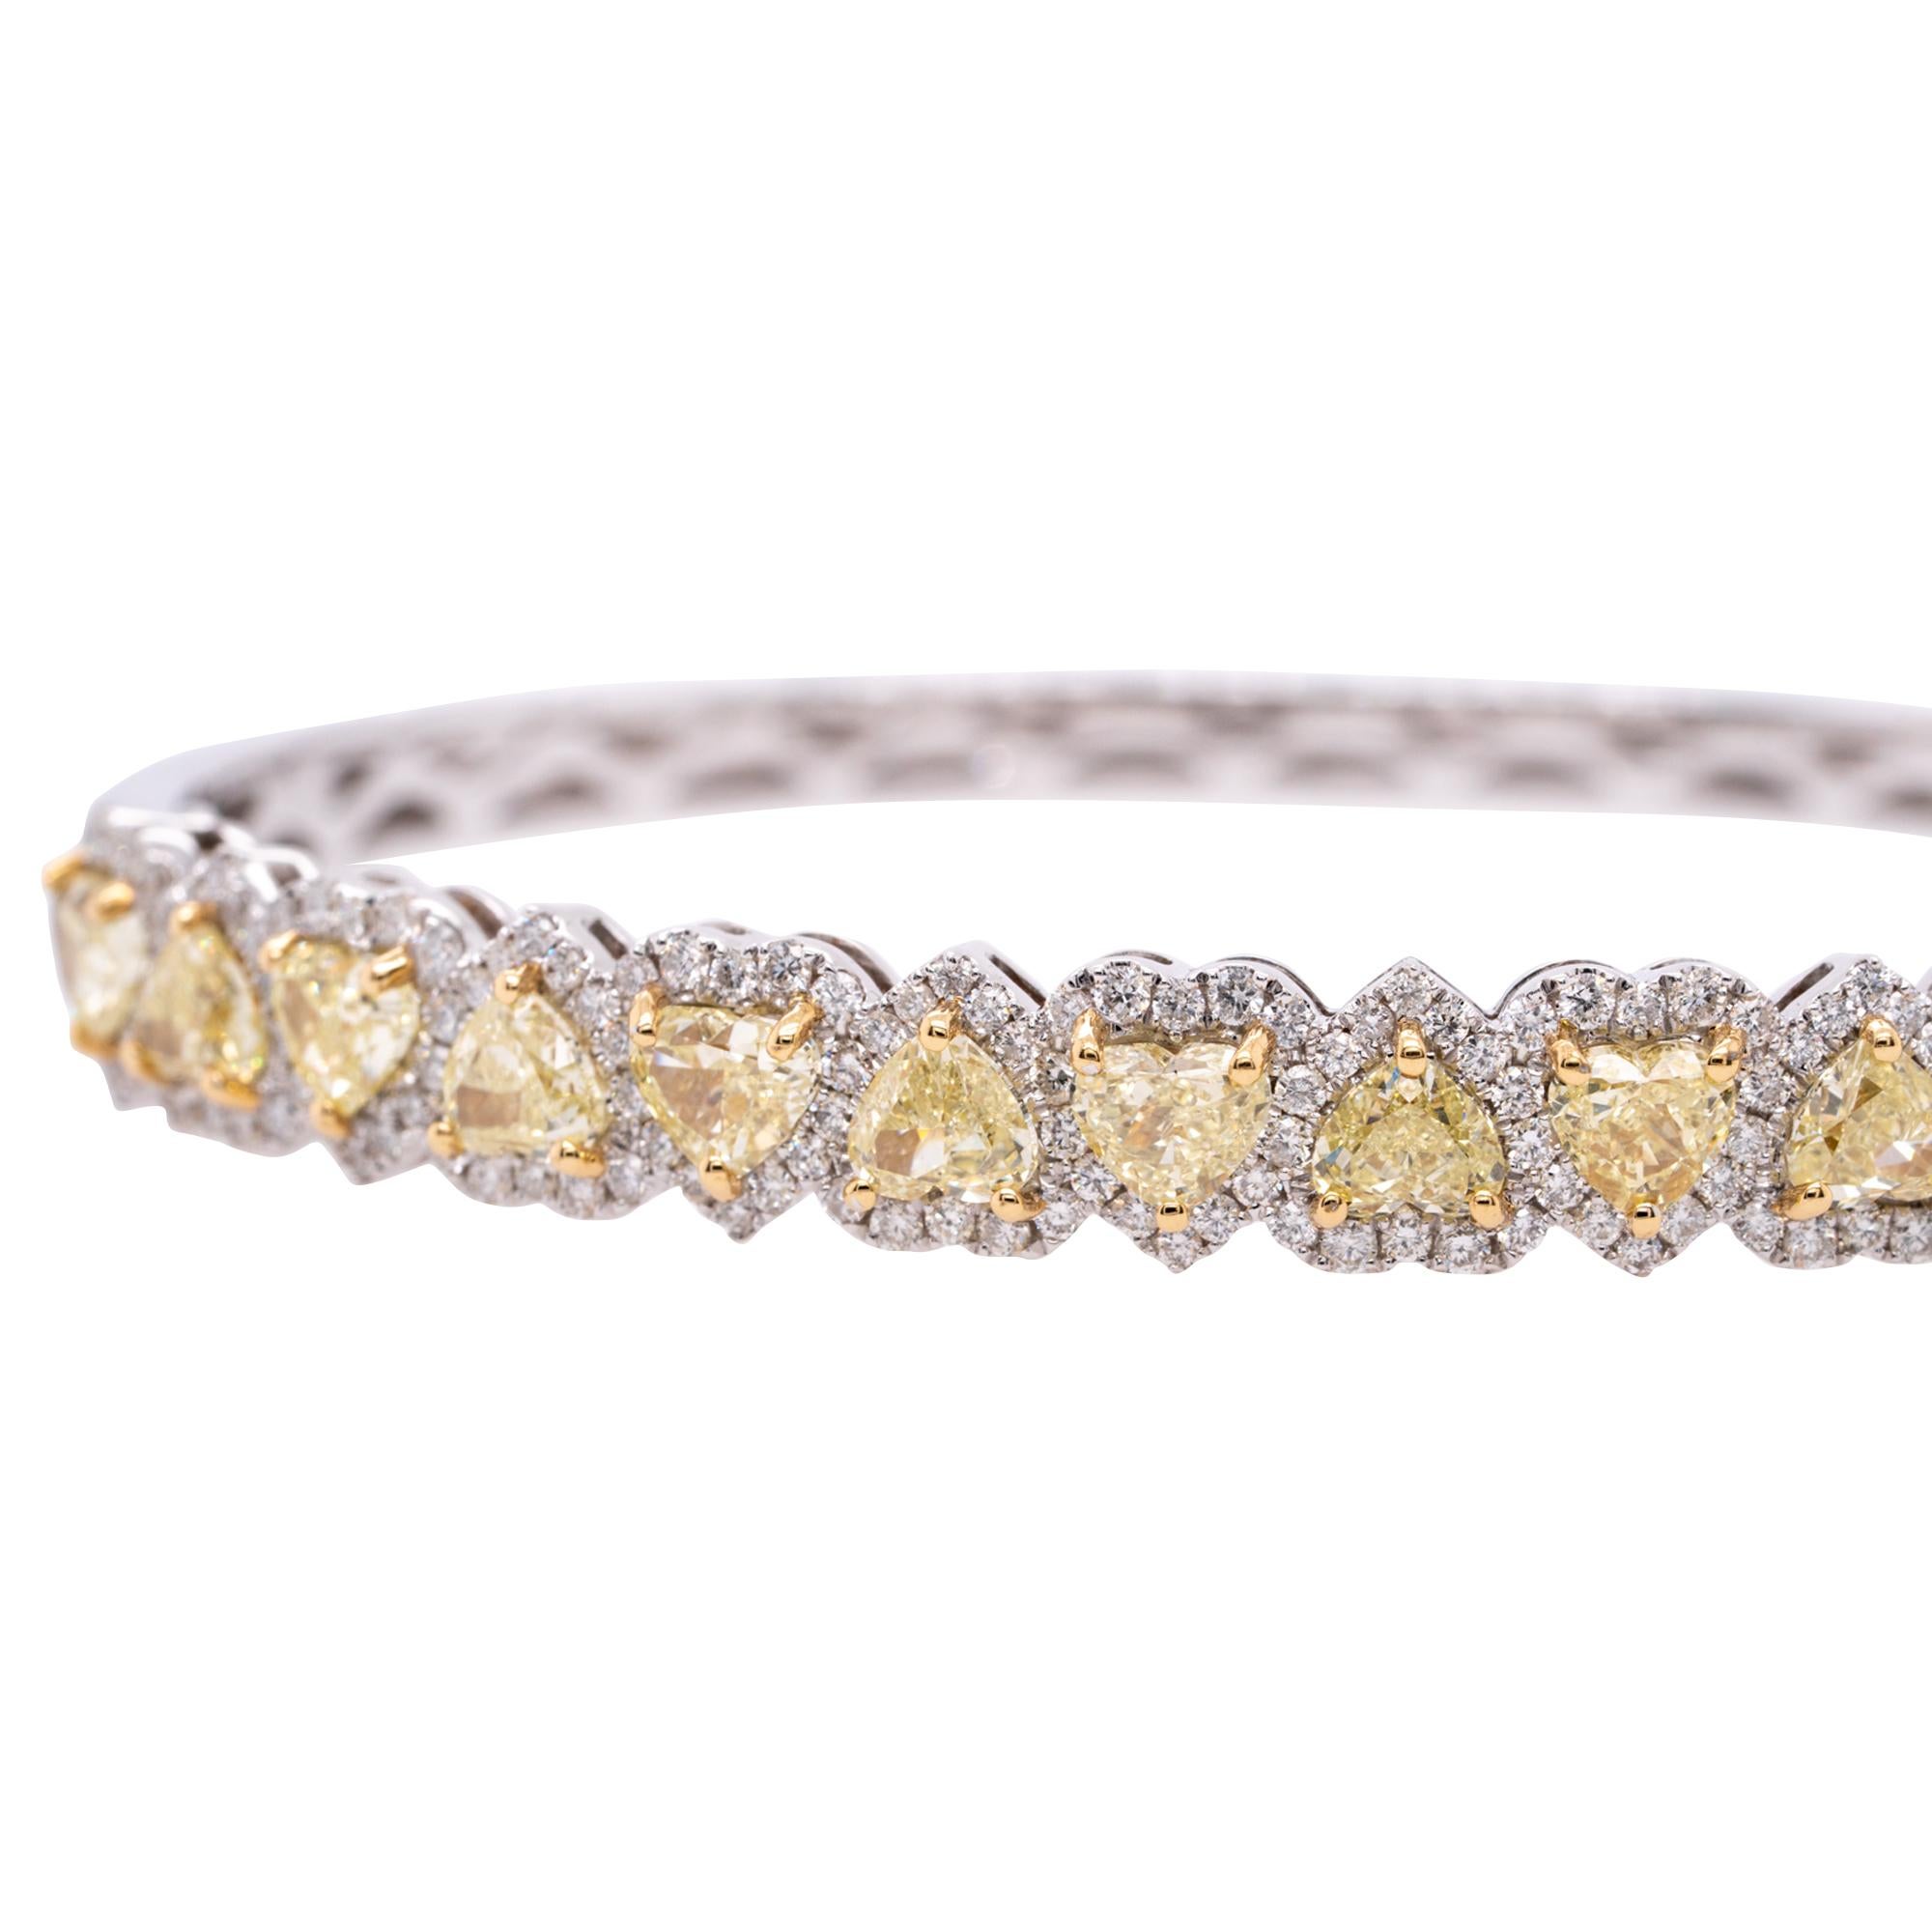 5.56 Carat Natural Fancy Heart & Round Cut Diamond Pave Bangle For Sale 3